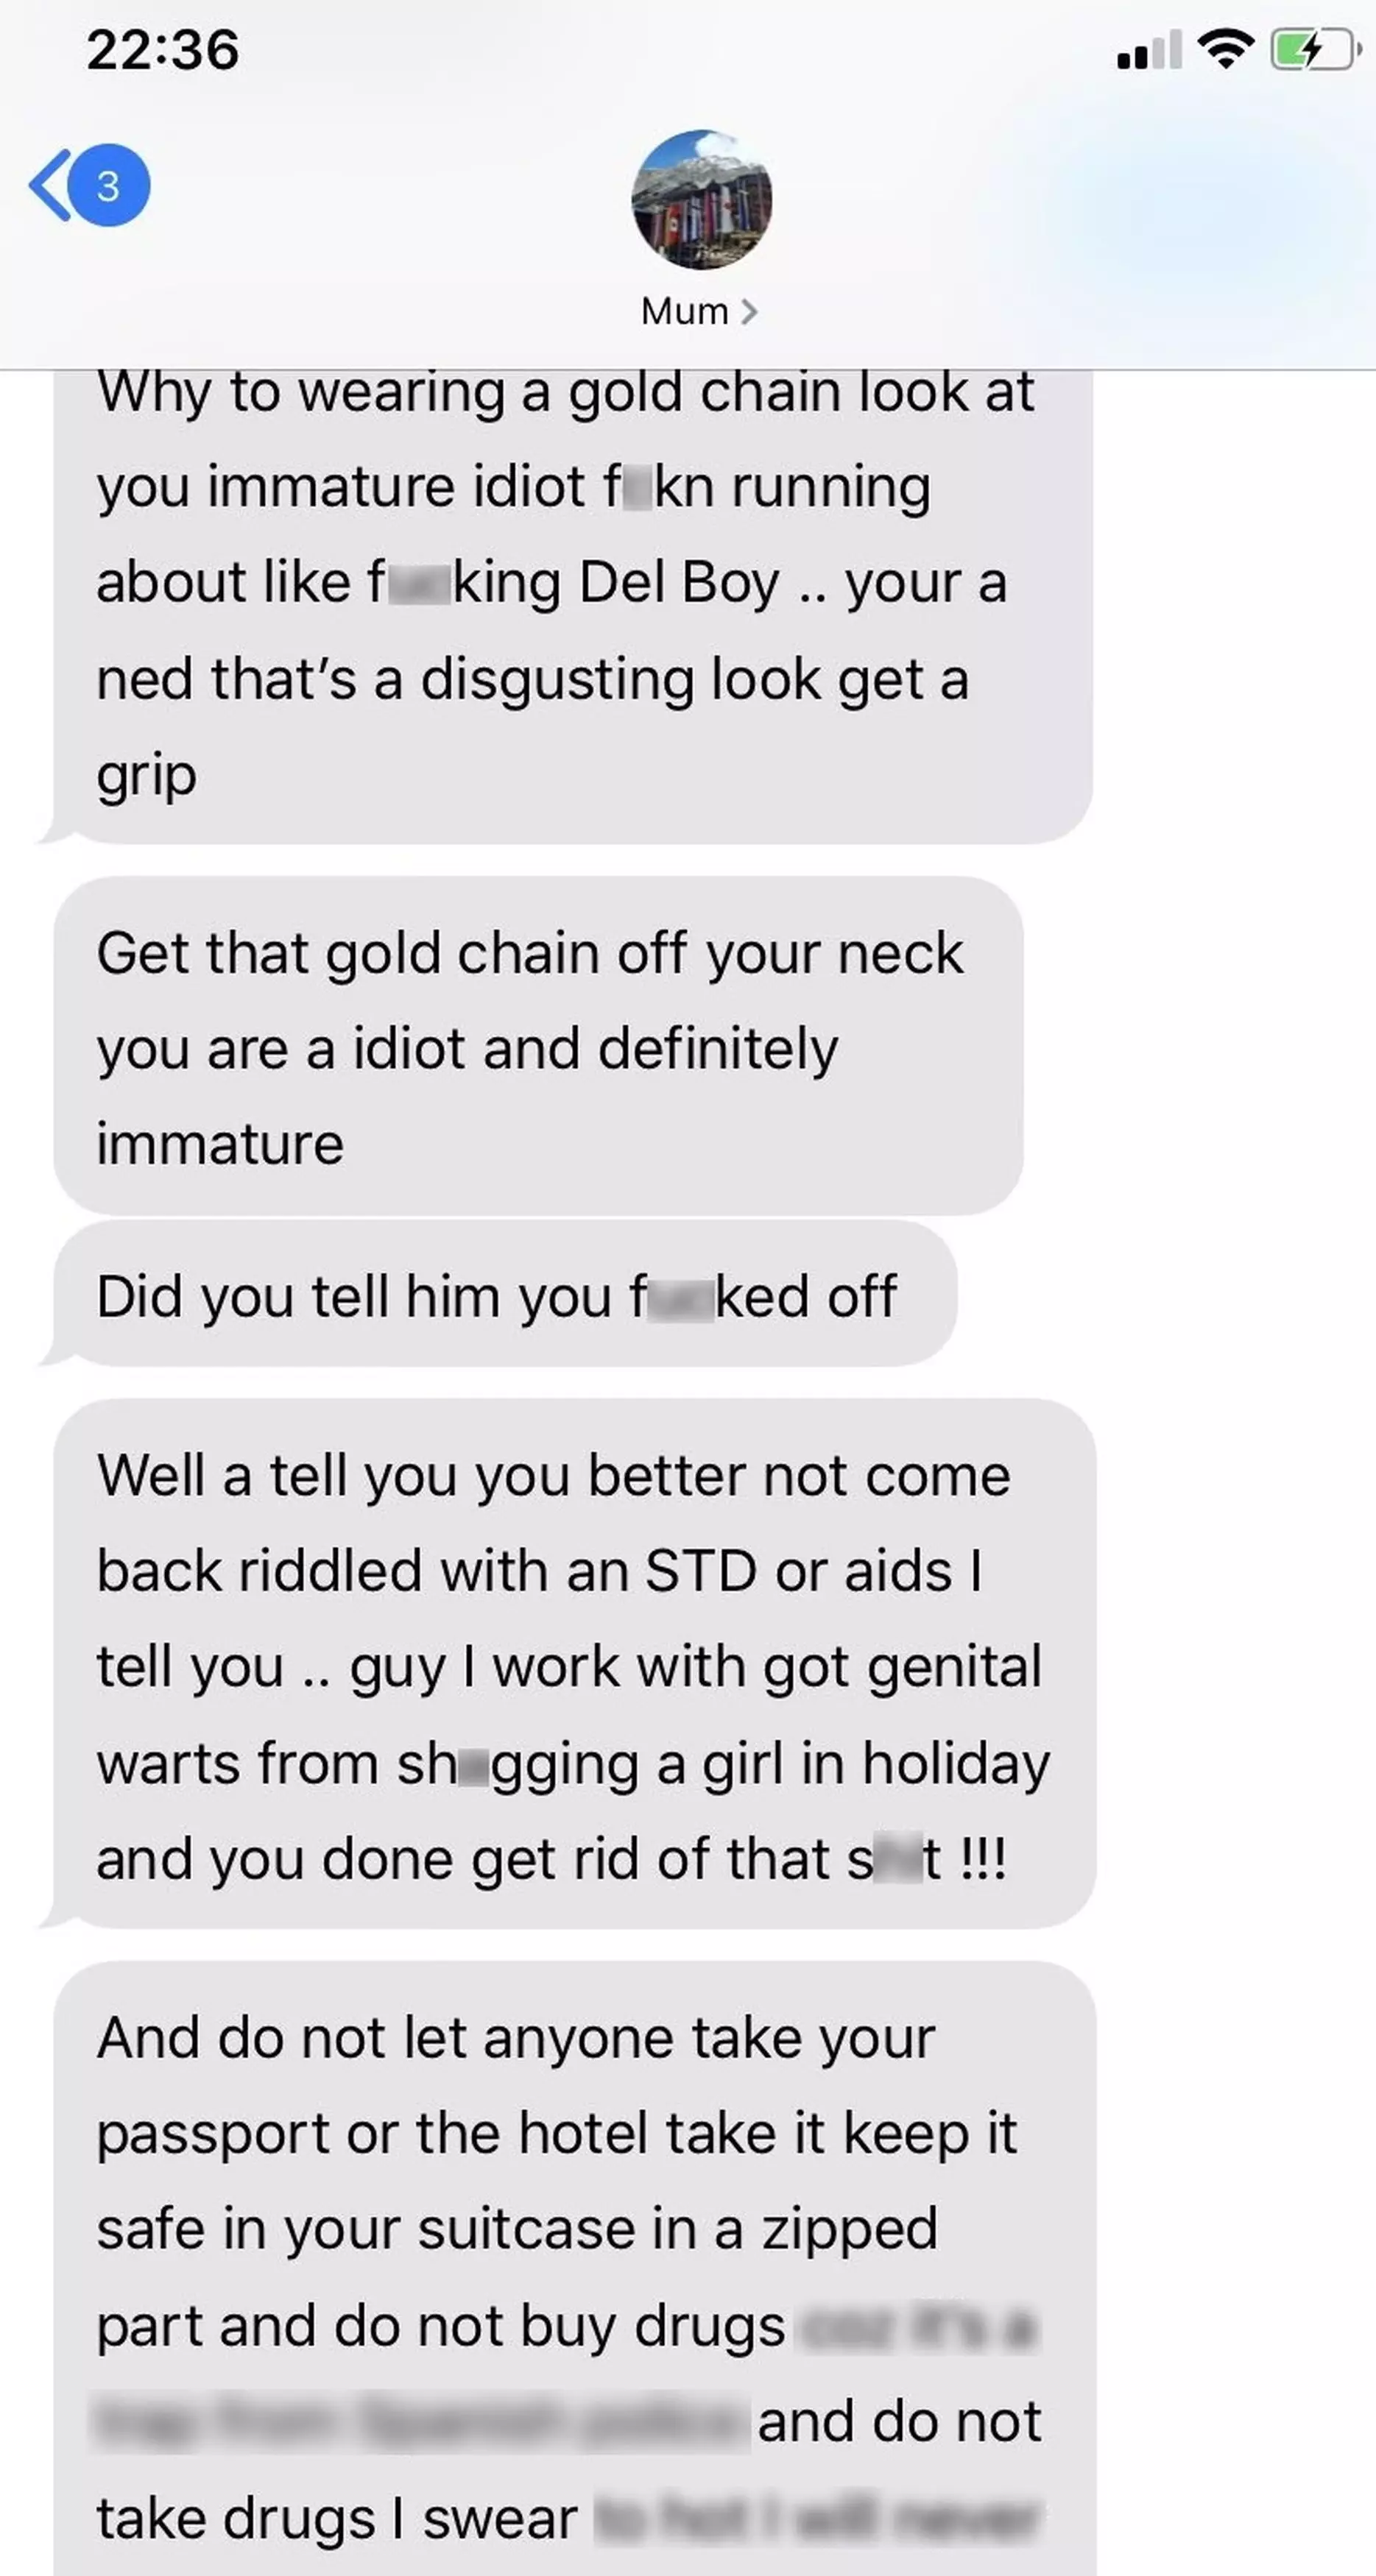 The messages from his mum.